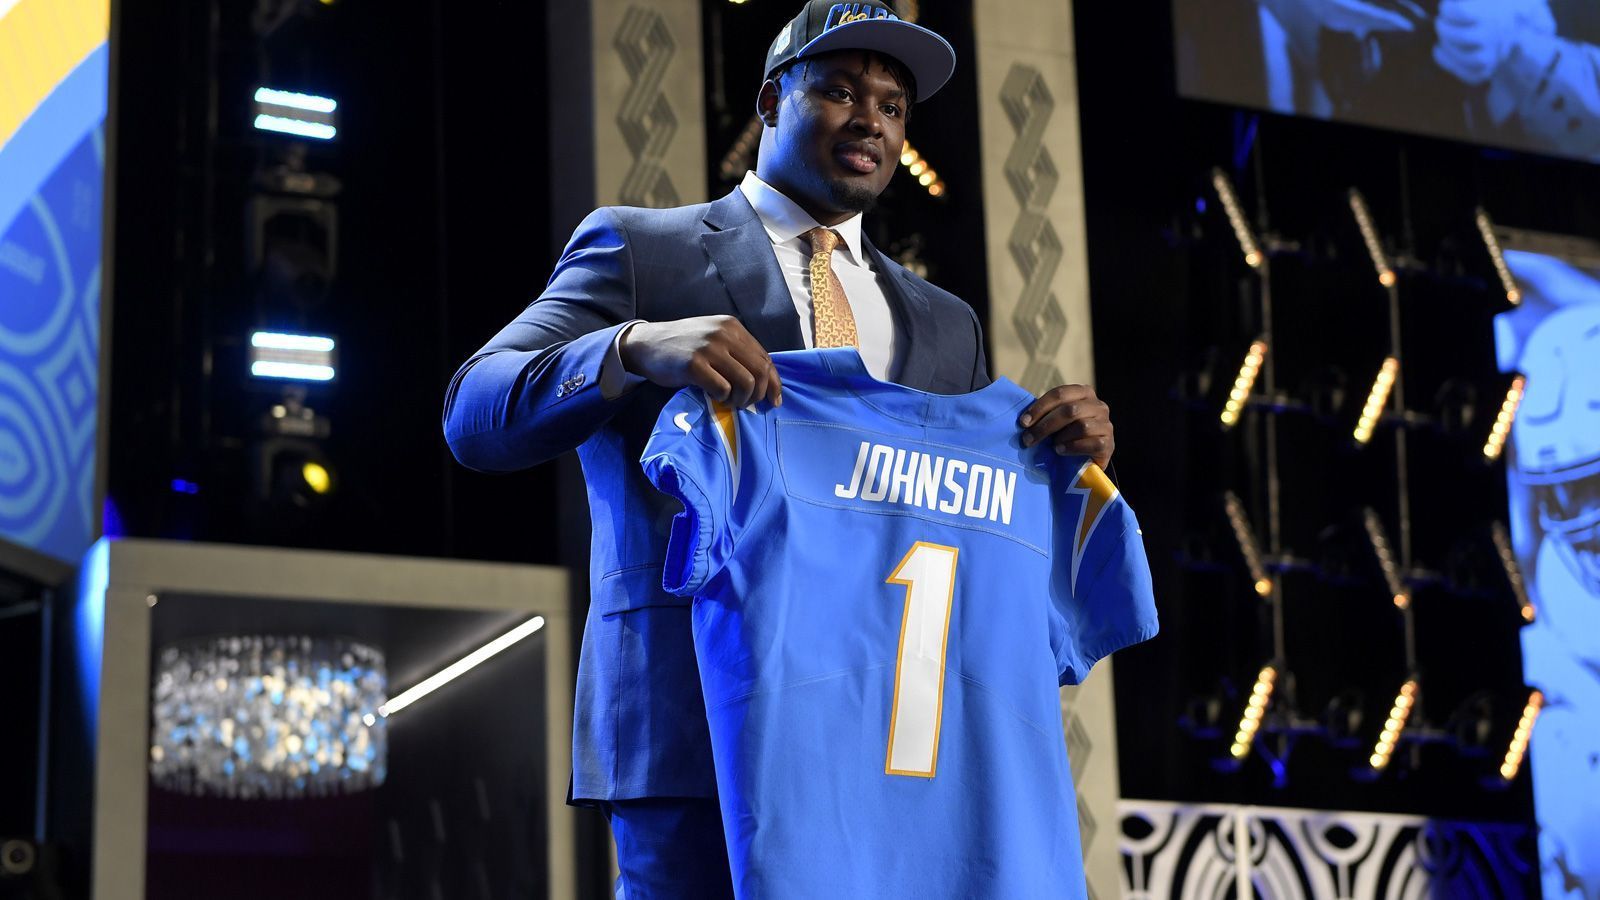 
                <strong>Los Angeles Chargers</strong><br>
                &#x2022; 17. Pick (Runde 1): Zion Johnson (OG, Boston College)<br>&#x2022; 15. Pick (Runde 3): JT Woods (S, Baylor)<br>&#x2022; 18. Pick (Runde 4): Isaiah Spiller (RB, Texas A&M)<br>&#x2022; 17. Pick (Runde 5): Ottio Ogbonnia (DT, UCLA)<br>&#x2022; 16. Pick (Runde 6): Jamaree Salyer (G, Georgia)<br>&#x2022; 35. Pick (Runde 6): Ja'Sir Taylor (DB, Wake Forest)<br>&#x2022; 15. Pick (Runde 7): Deane Leonard (DB, Mississippi)<br>&#x2022; 39. Pick (Runde 7): Zander Horvath RB, Purdue)<br>
              